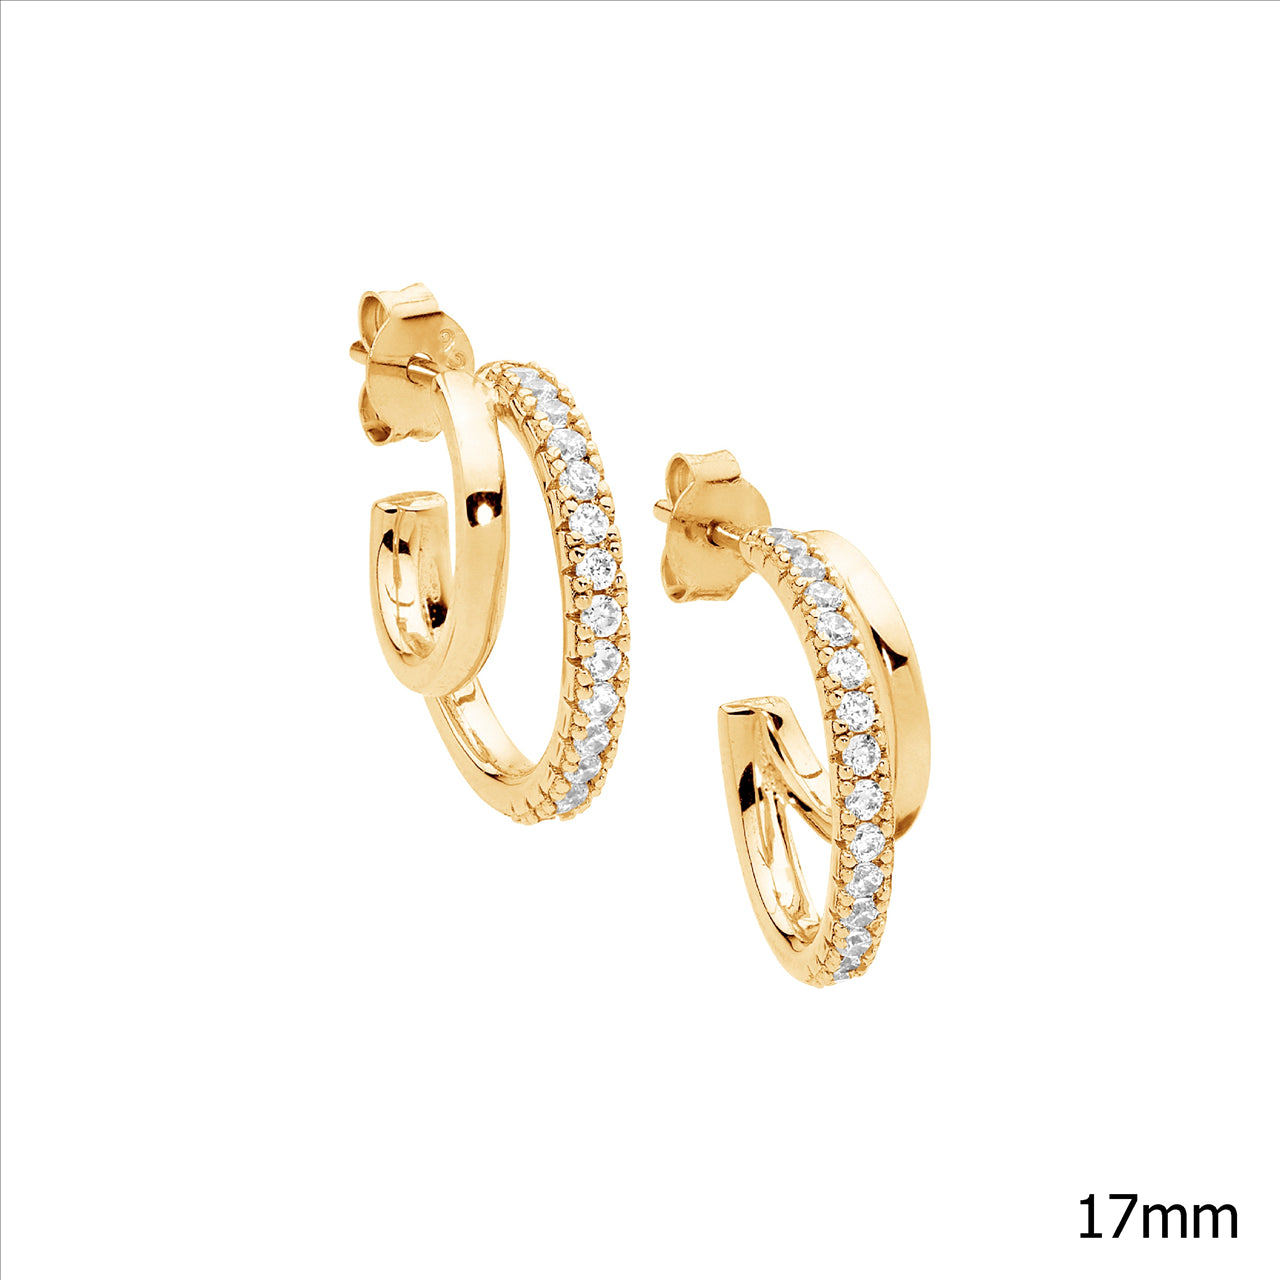 Sterling Silver Gold Plated 17mm Double Hoop Stud Earrings Set With White Cubic Zirconia's